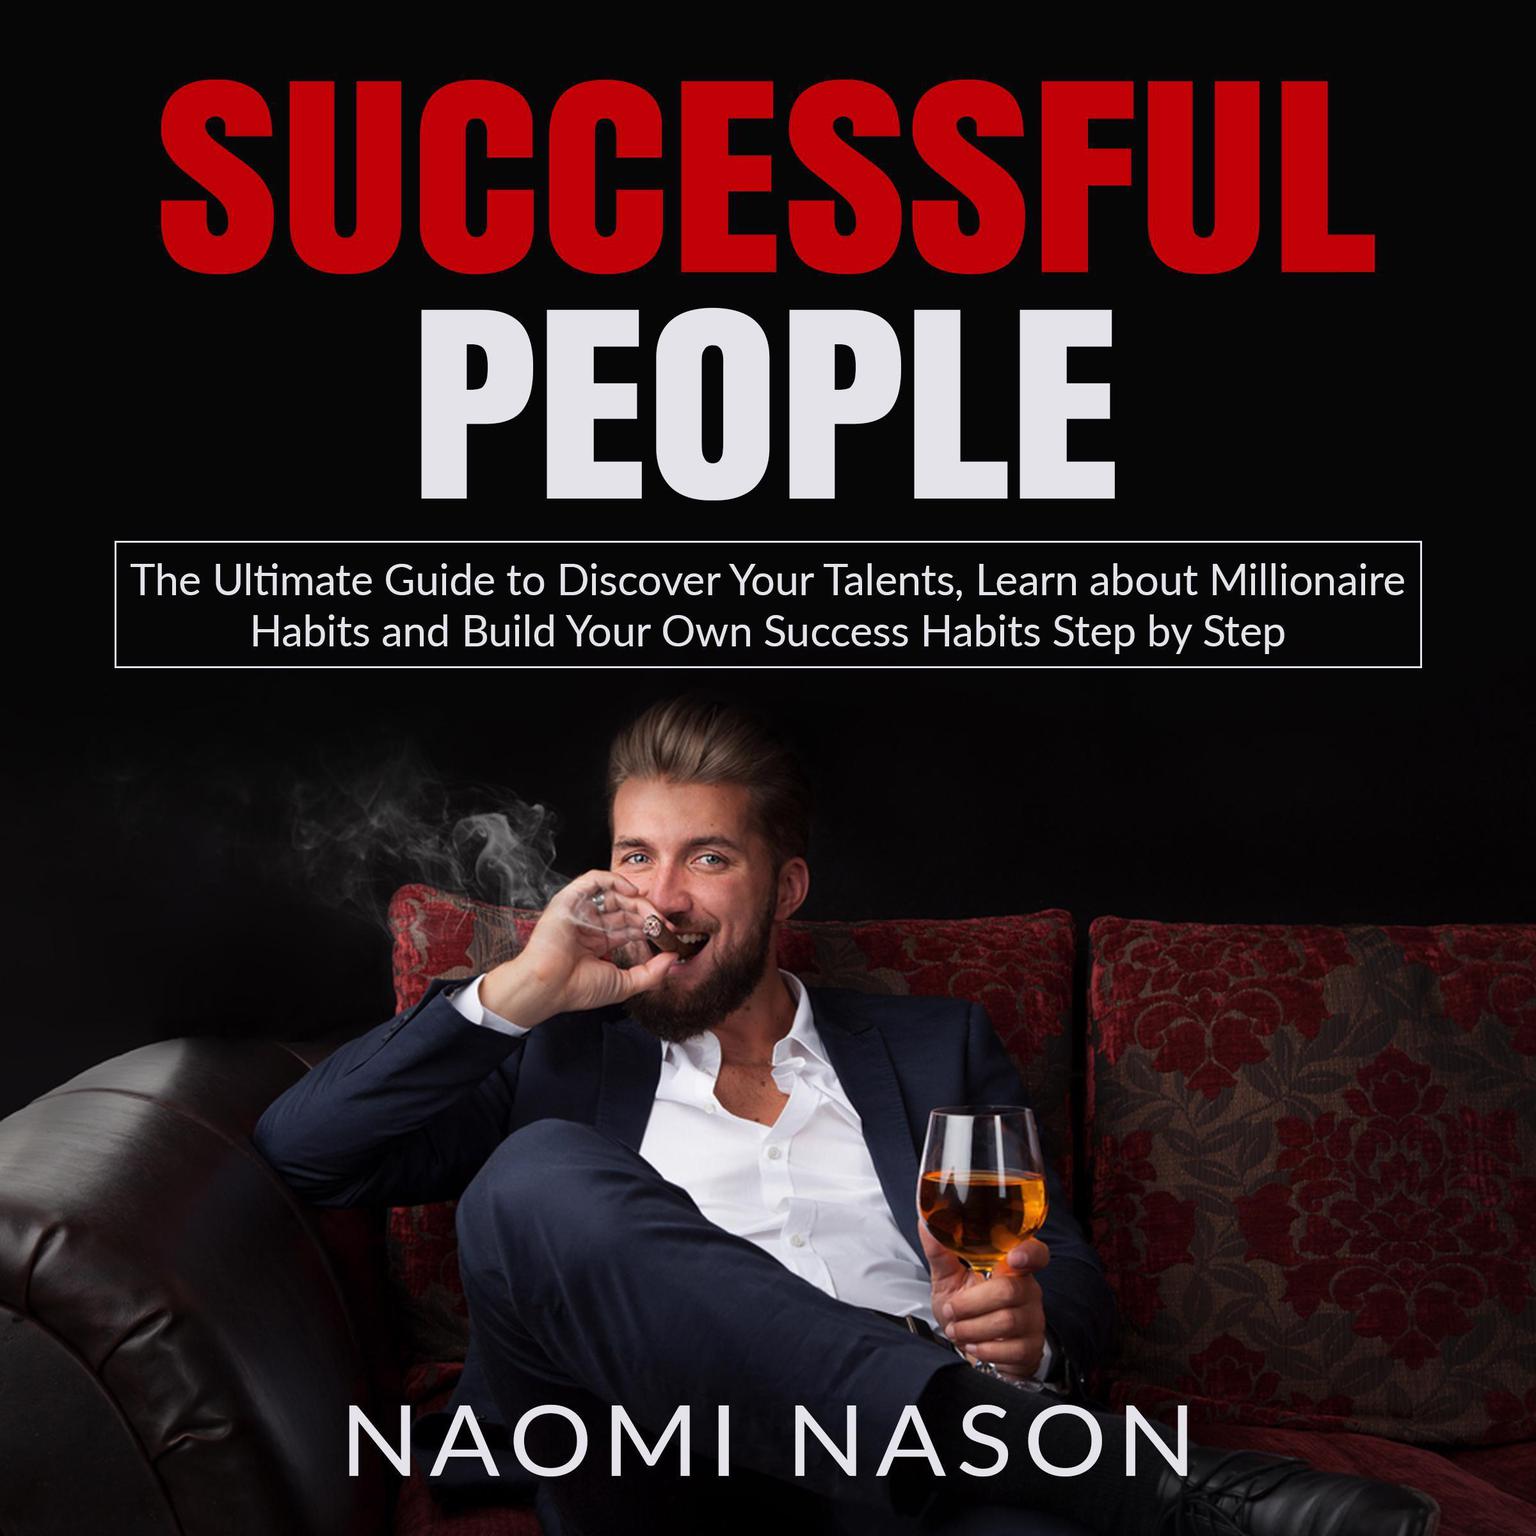 Successful People: The Ultimate Guide to Discover Your Talents, Learn about Millionaire Habits and Build Your Own Success Habits Step by Step Audiobook, by Naomi Nason